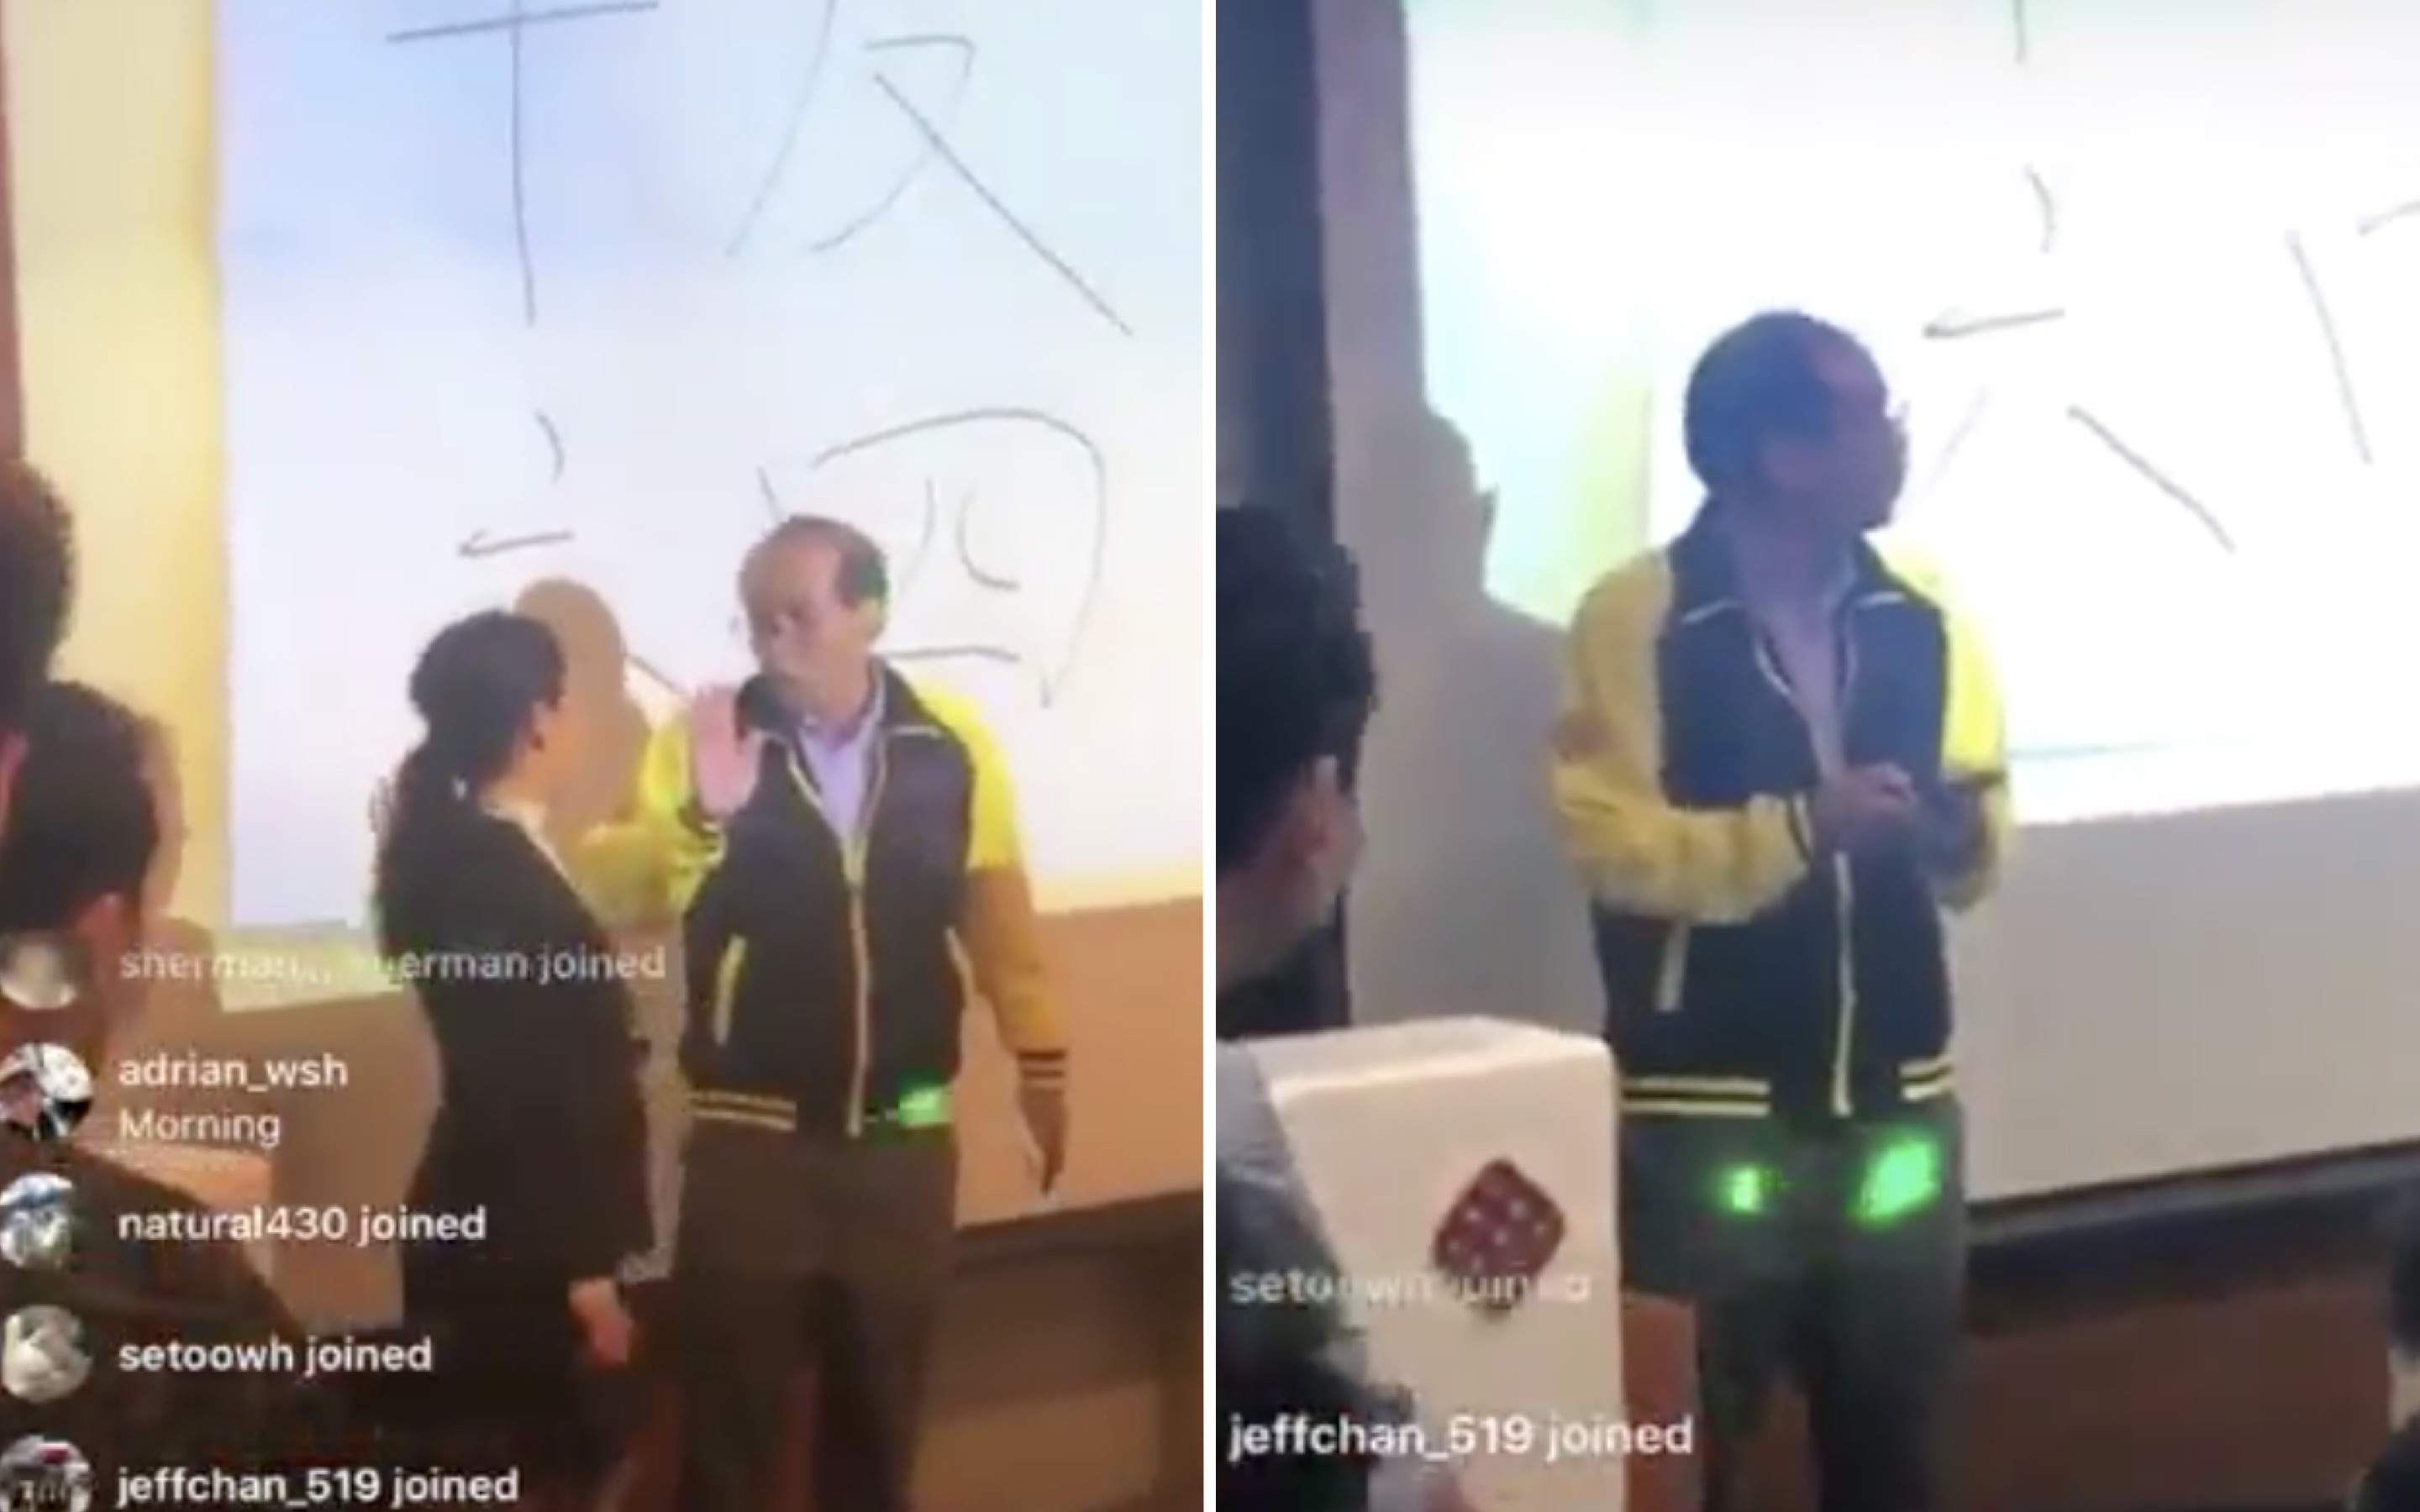 Chan Wai-keung, a college professor getting held up by students because of comments he made supporting harsher penalties for those arrested during anti-government protests. Screengrabs via Twitter video.